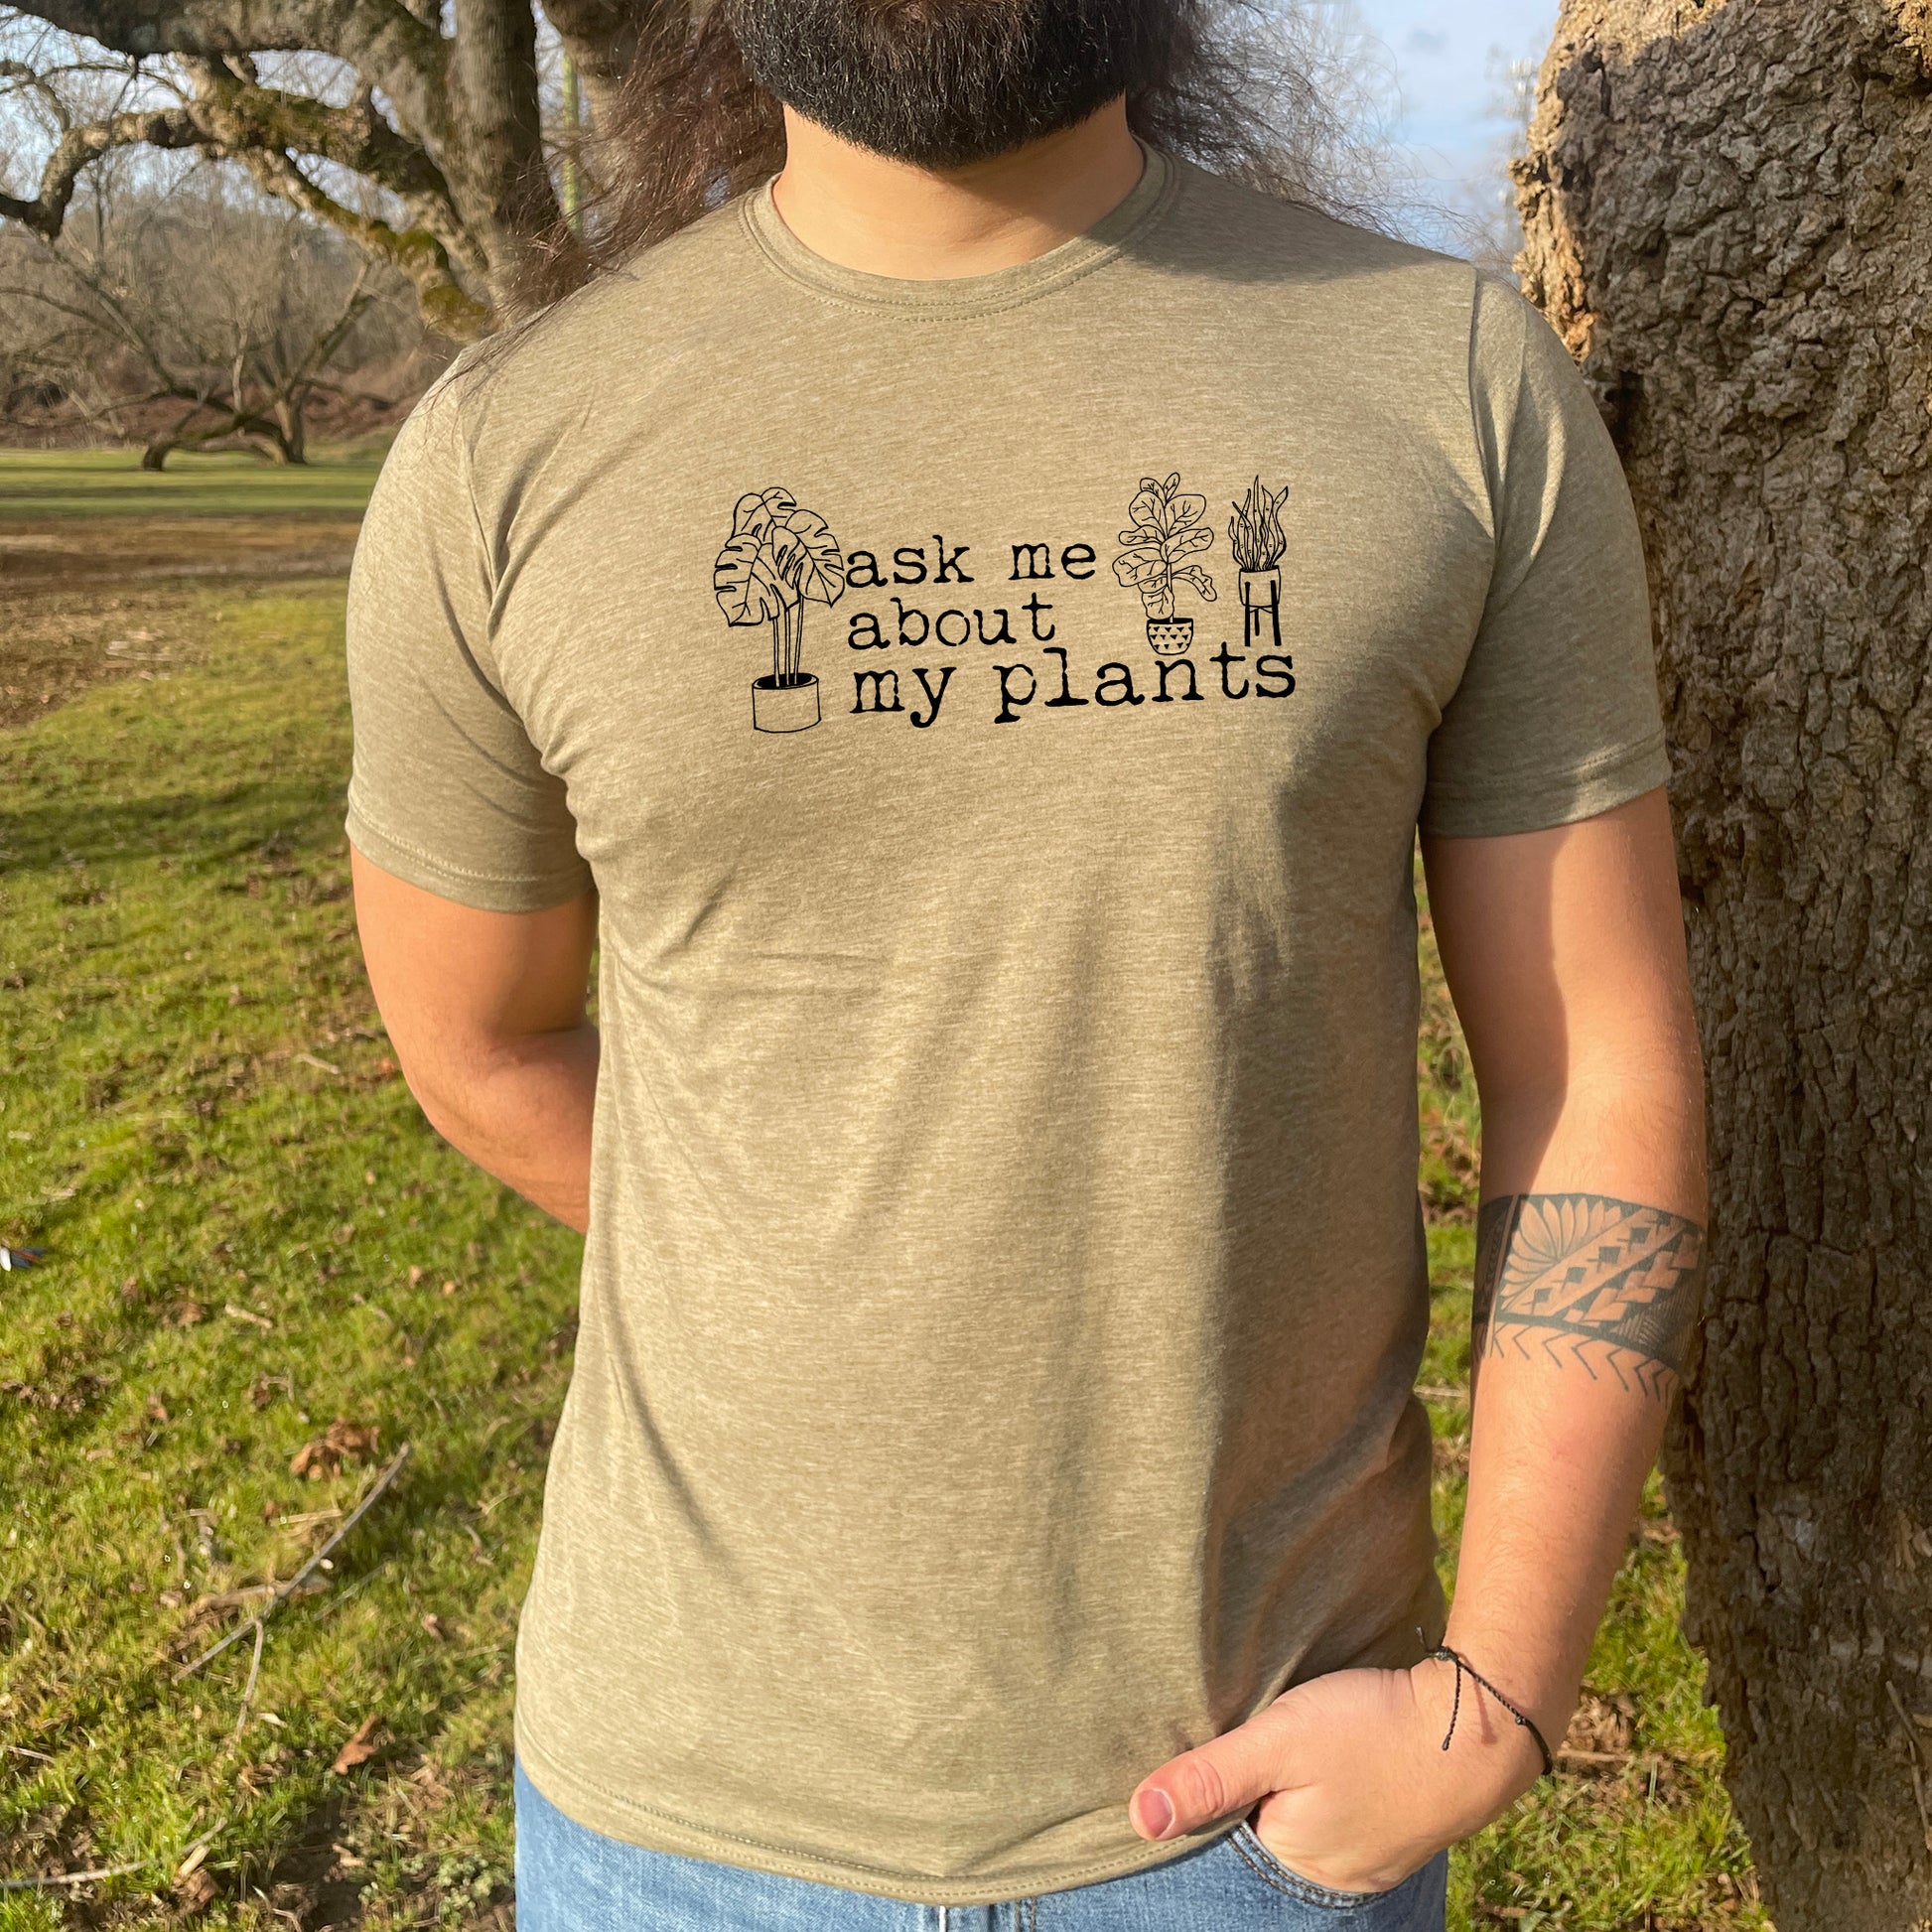 a man with a long beard wearing a t - shirt that says ask me about